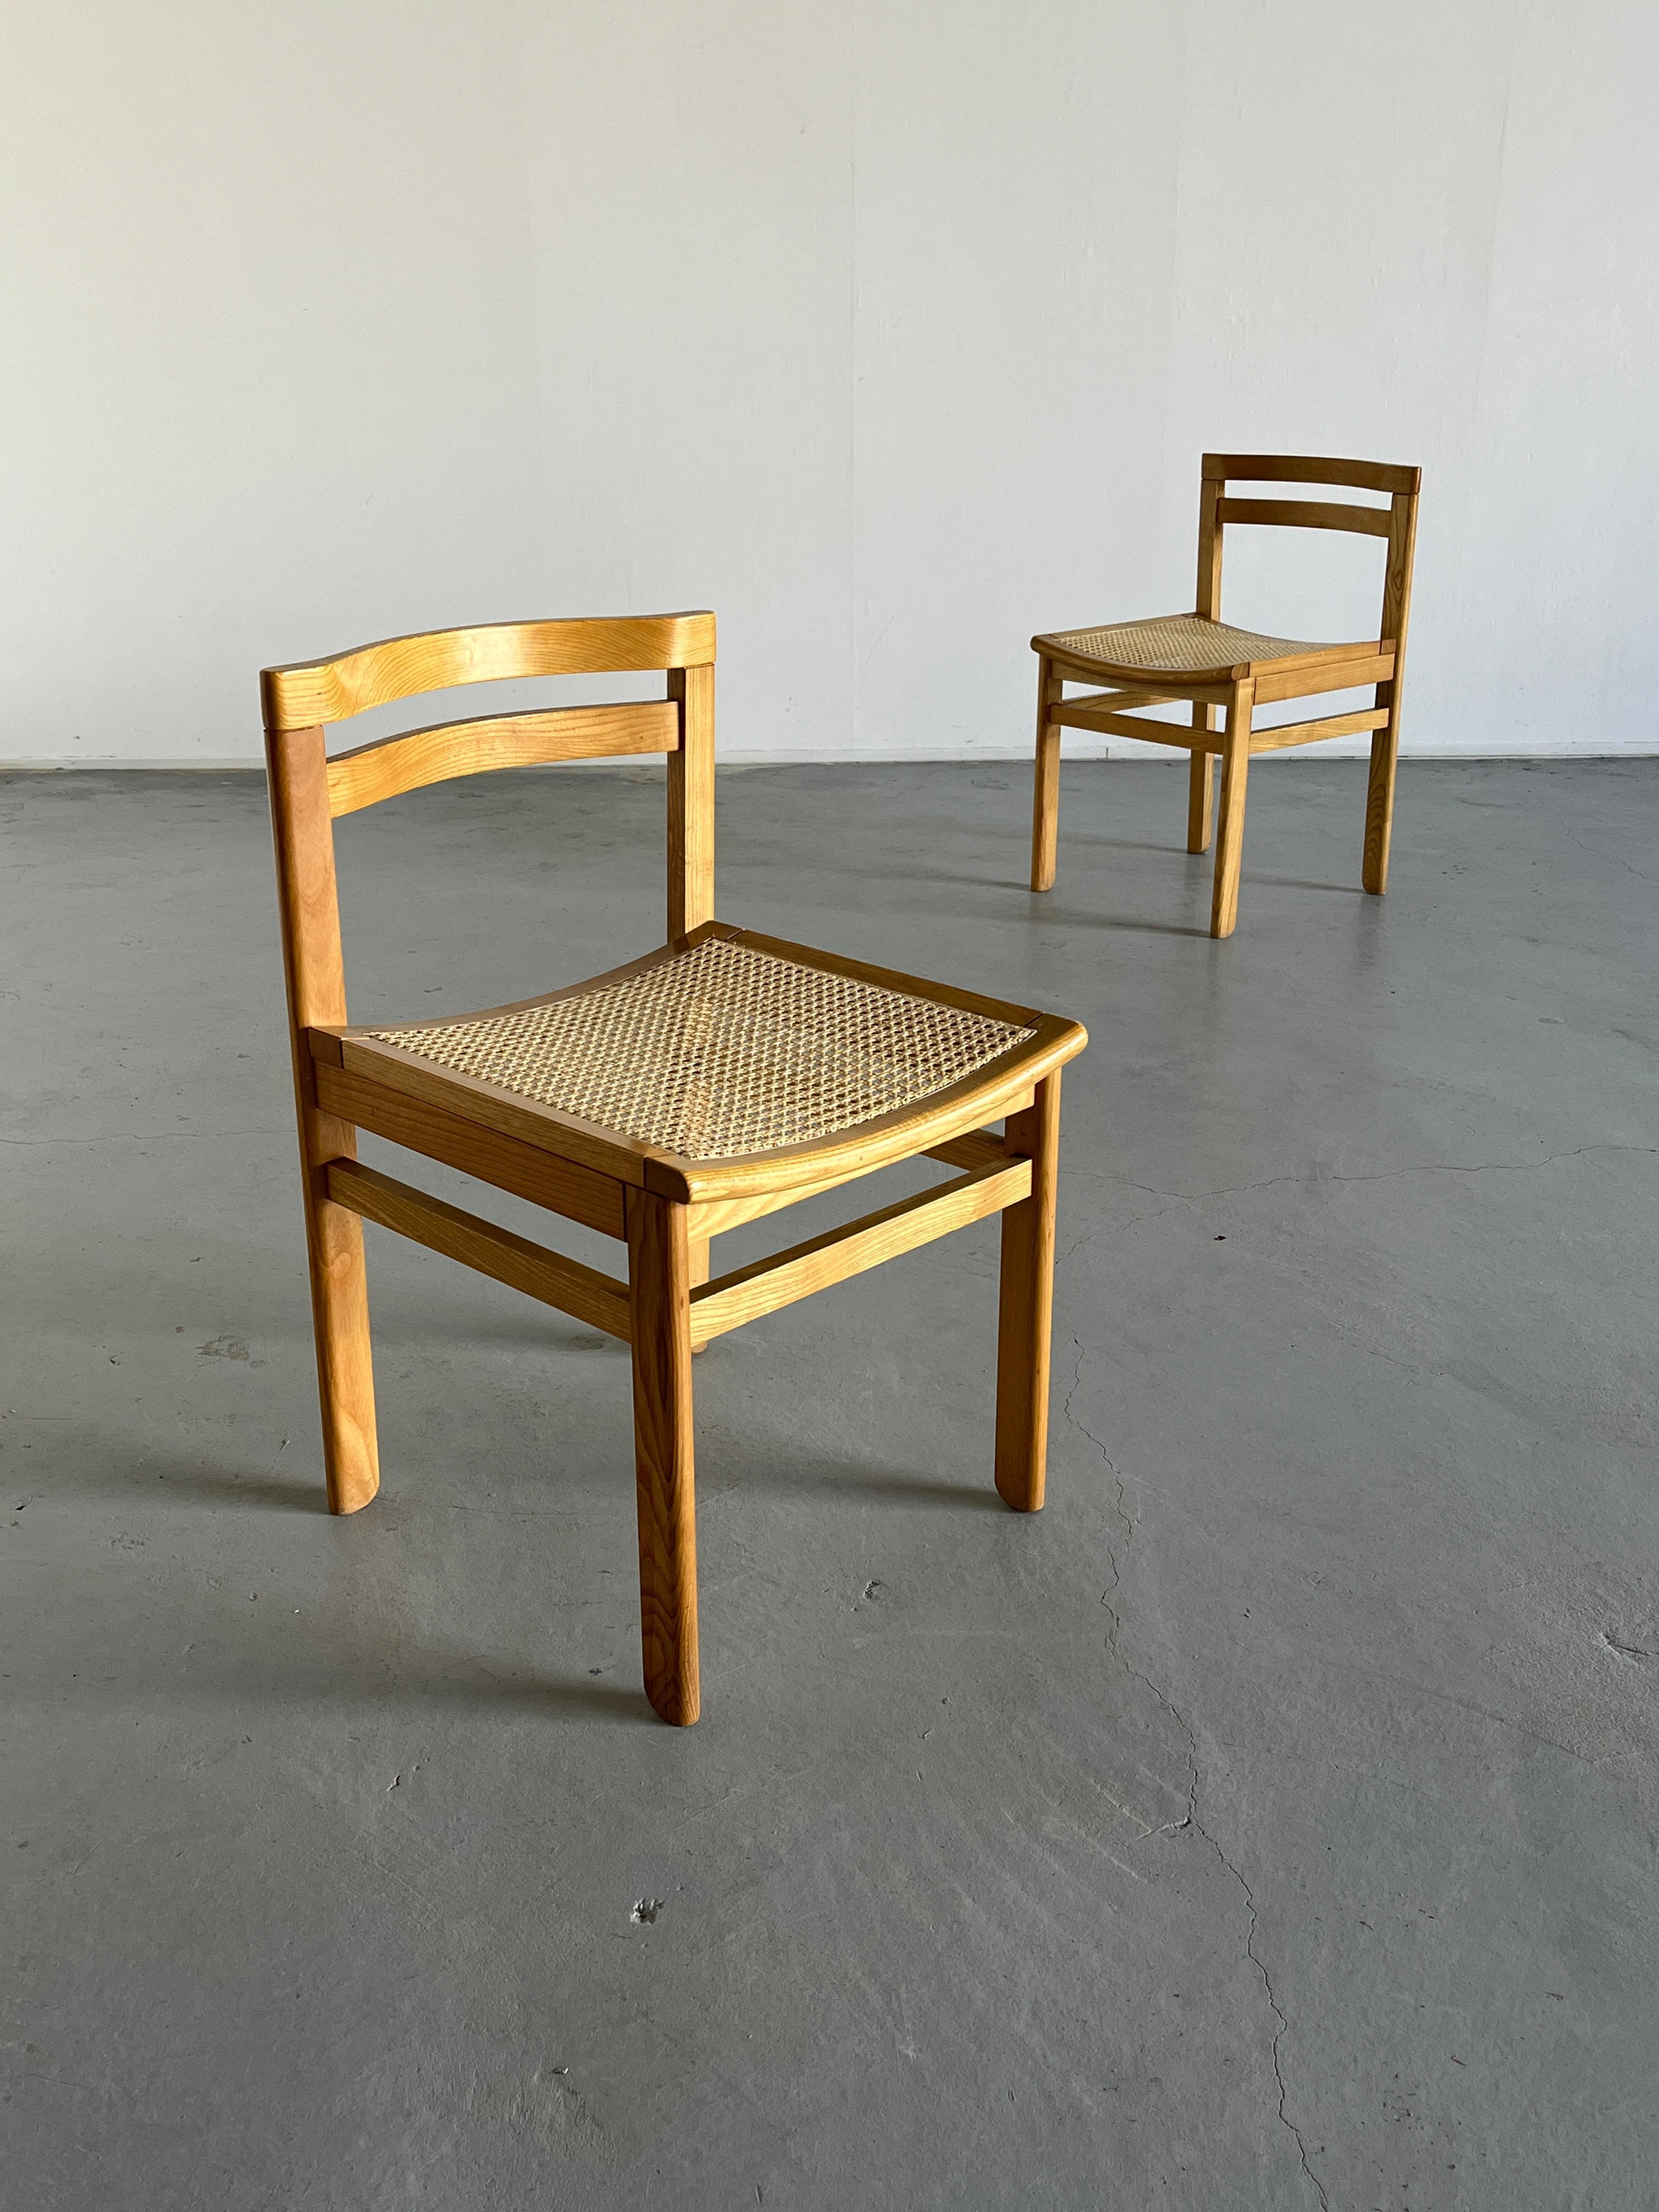 Pair of Vintage Mid-Century Wooden Dining Chairs in Beech and Cane, 1960s For Sale 1